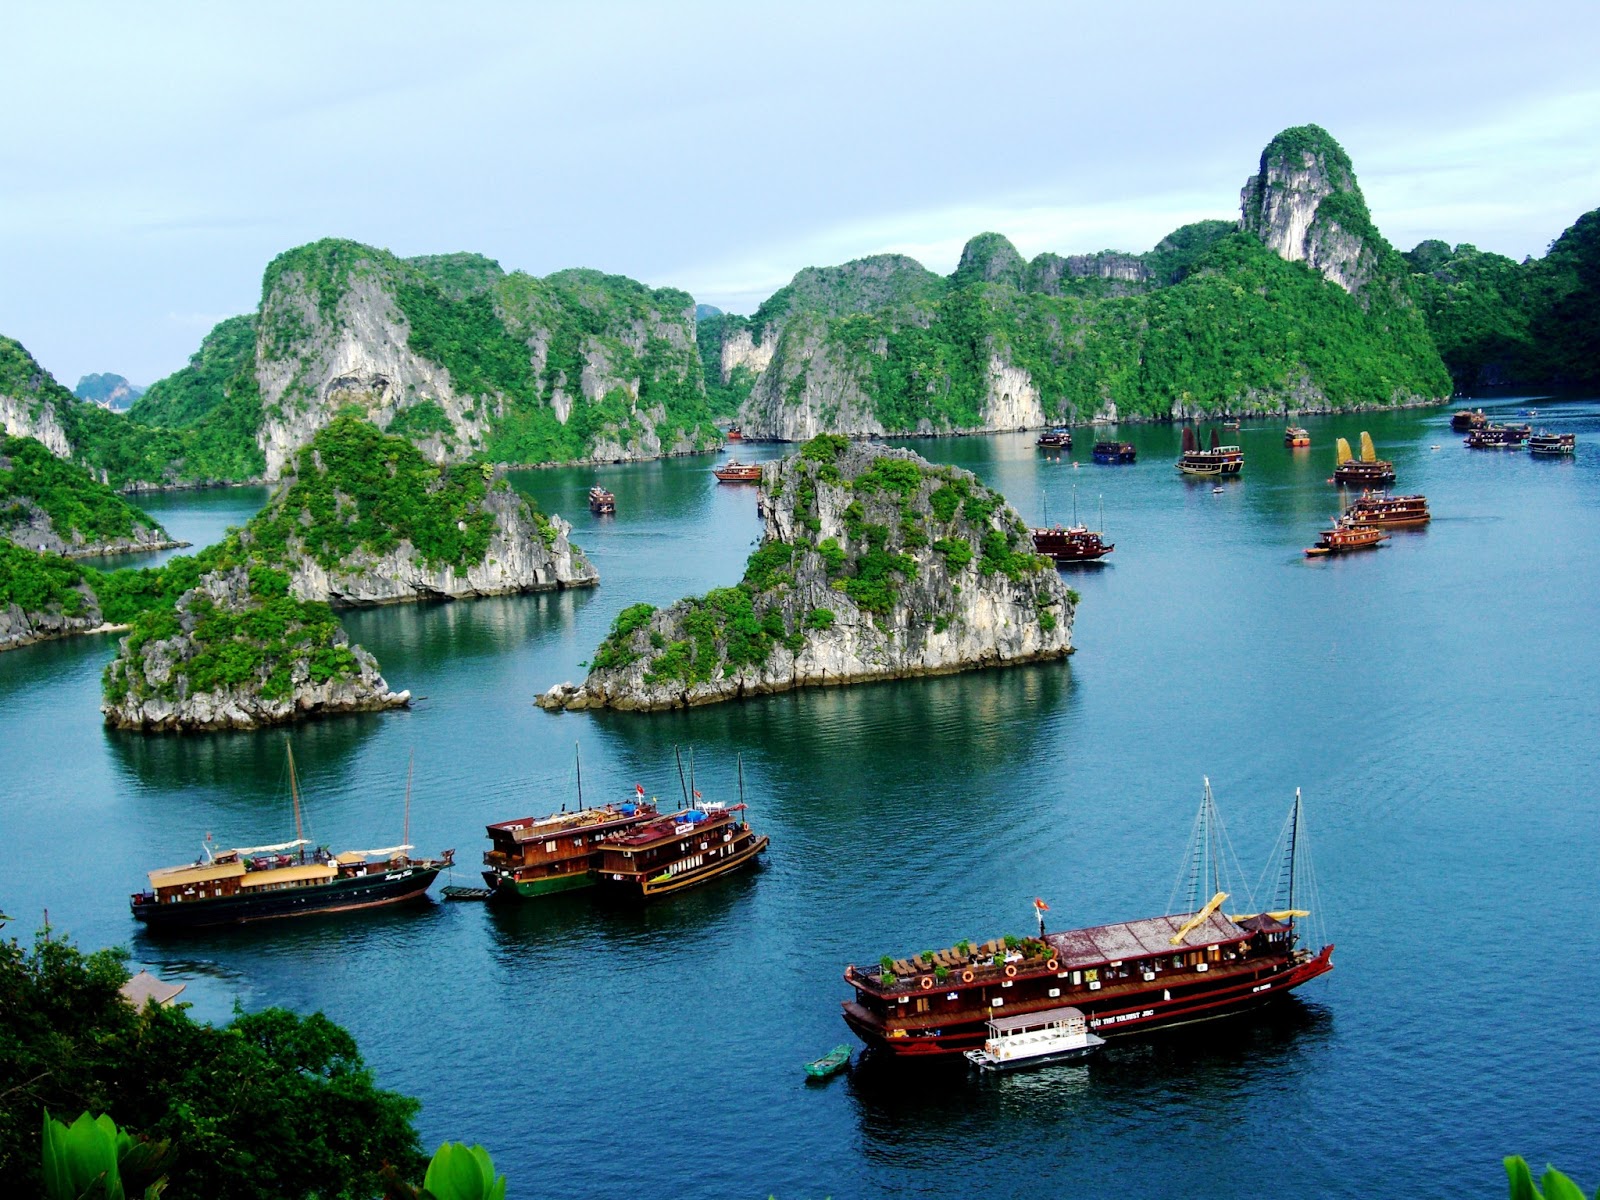 Tuan Chau, Halong, the destination thay you cannot miss